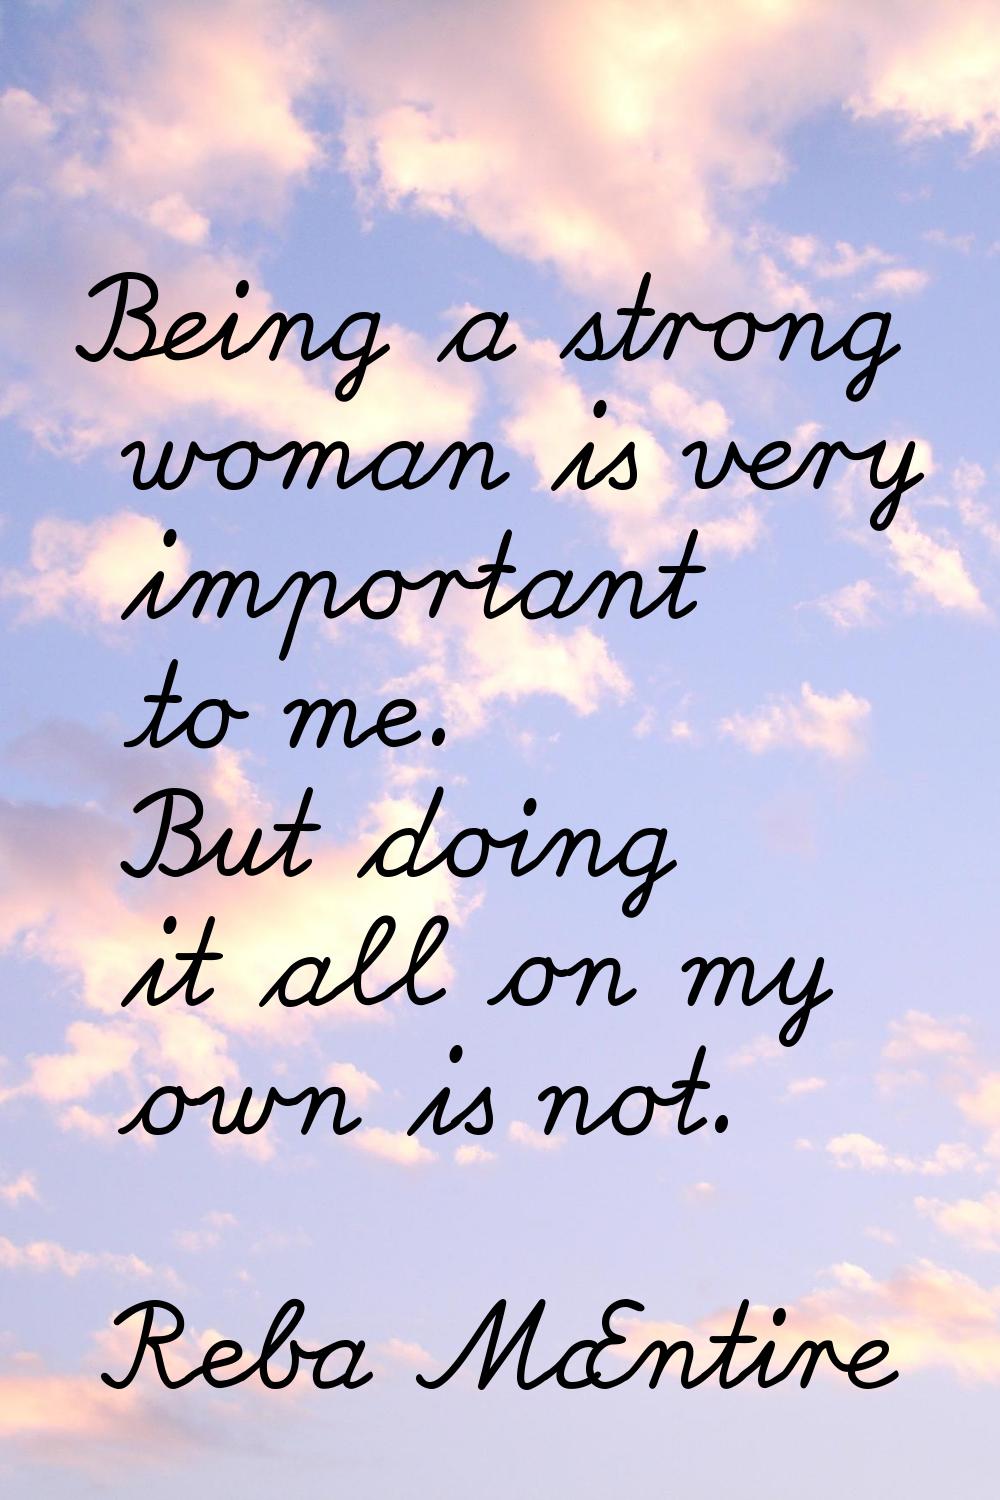 Being a strong woman is very important to me. But doing it all on my own is not.